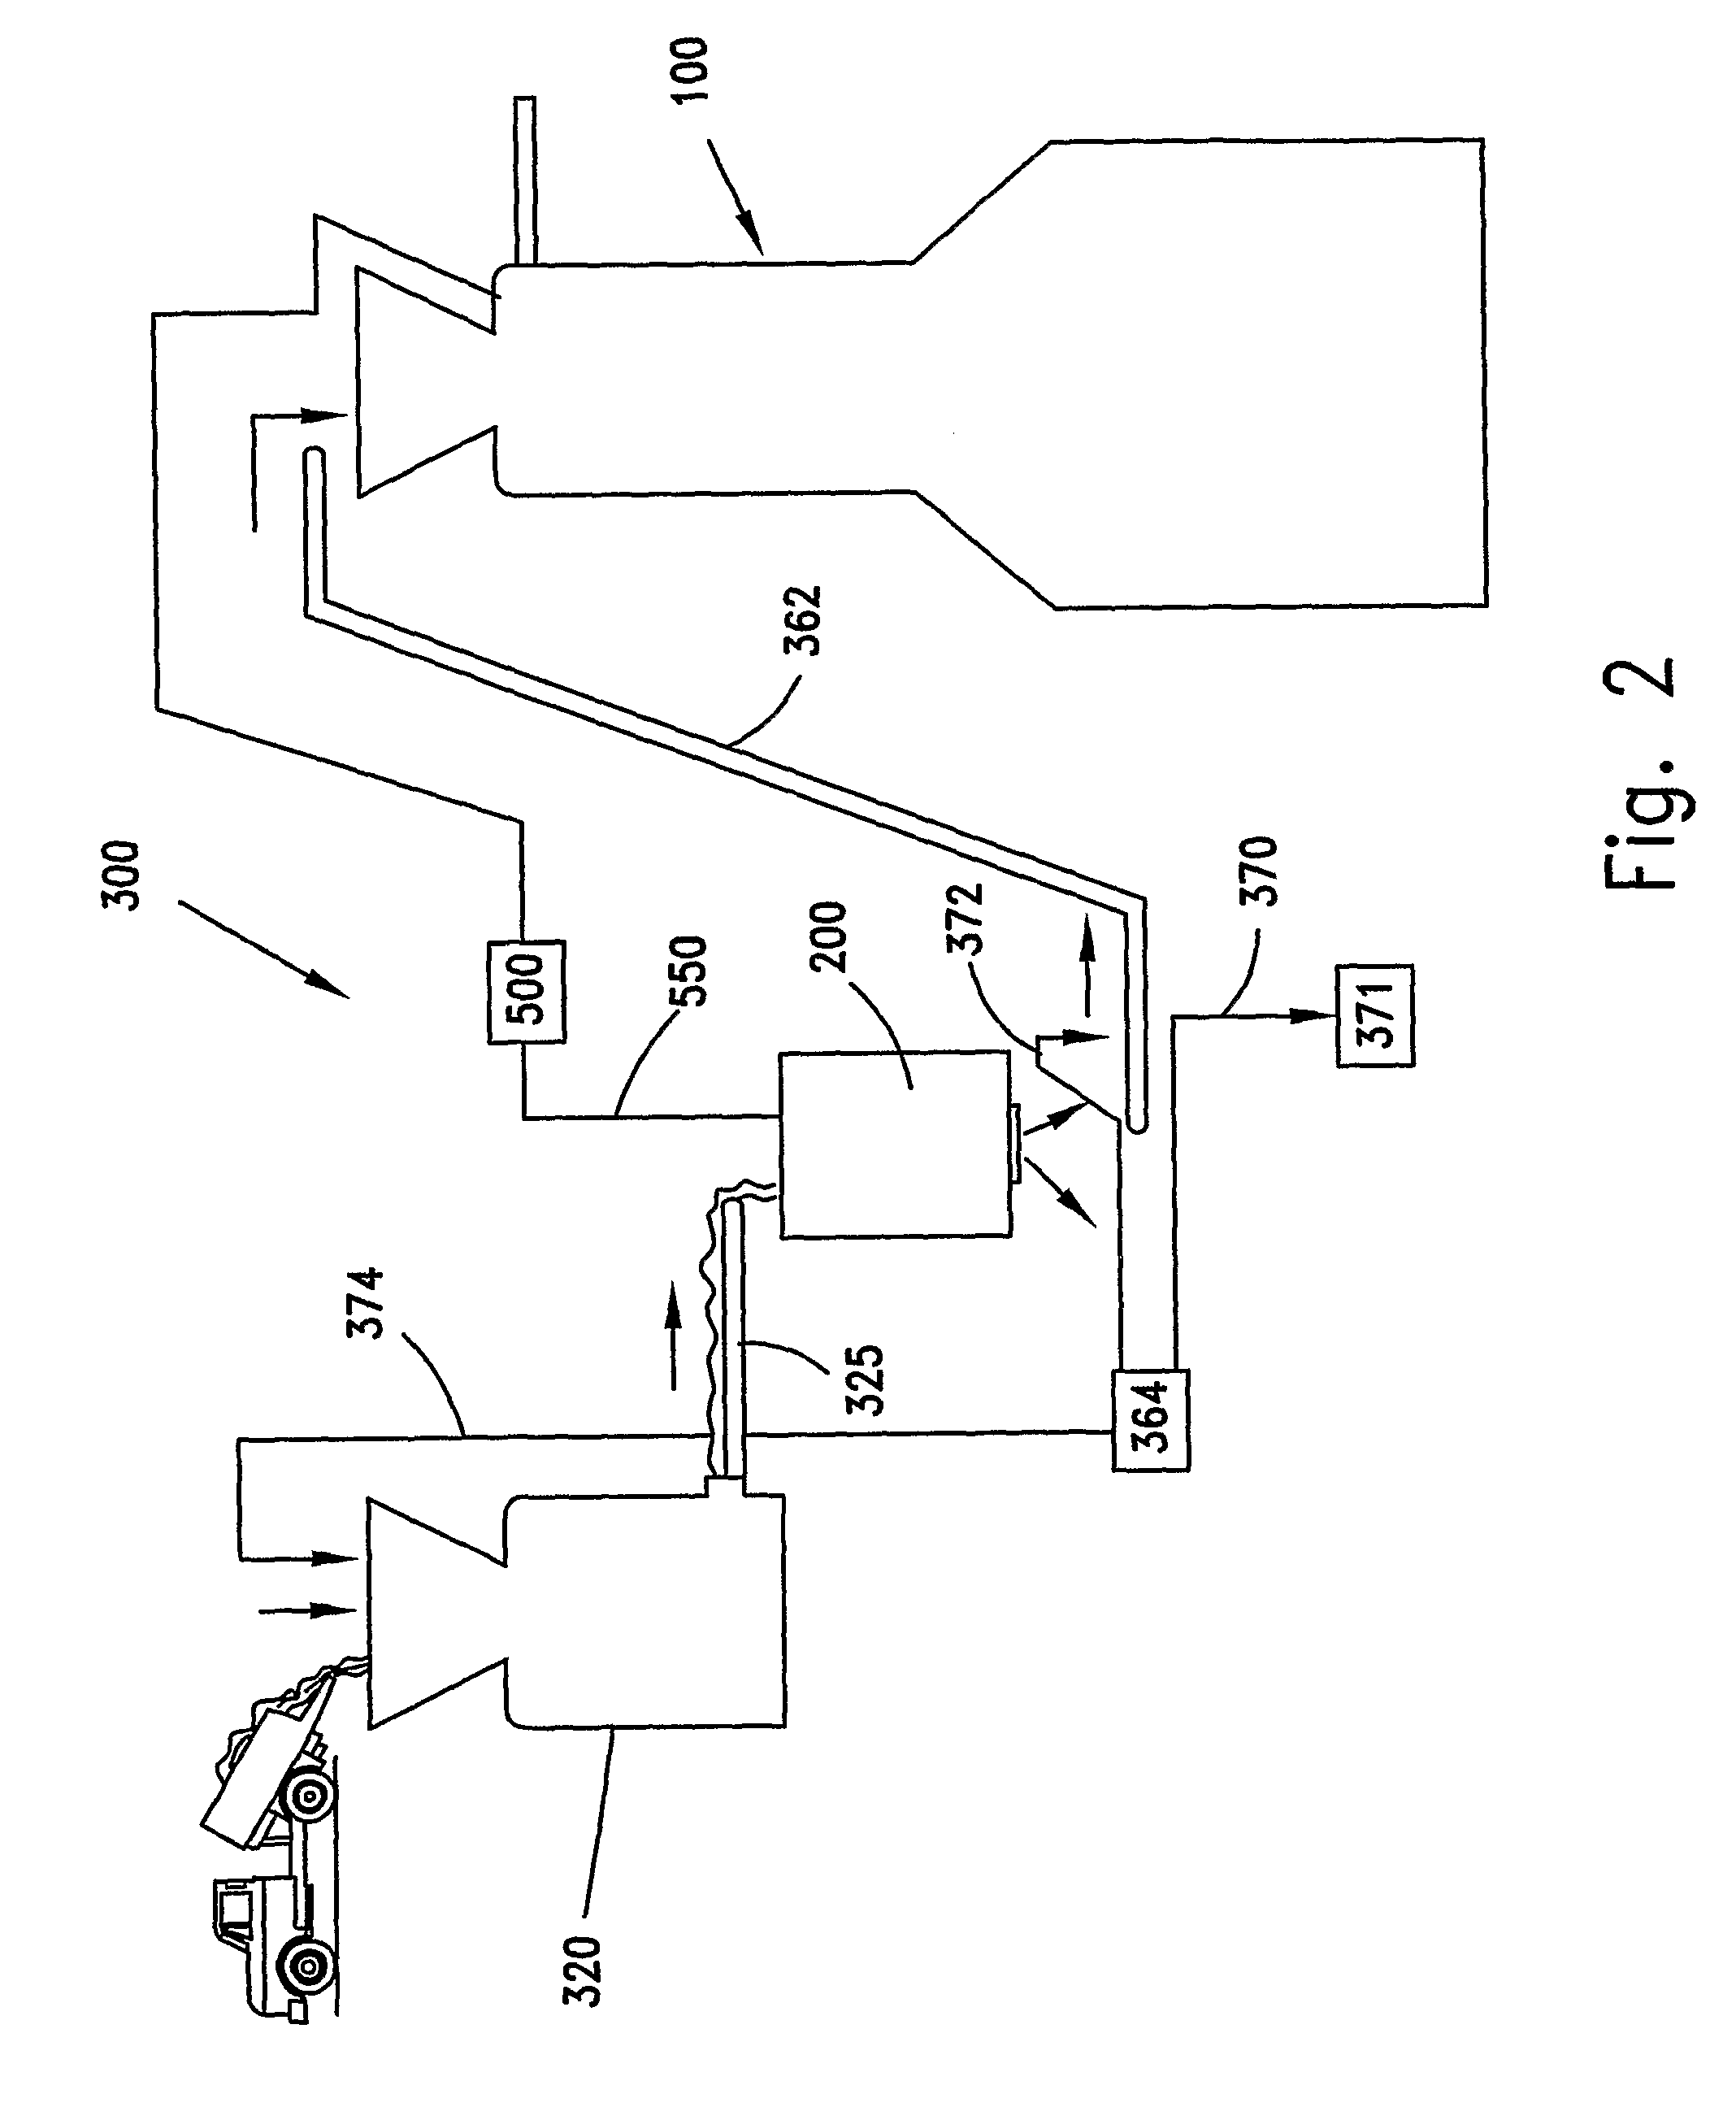 System for controlling the level of potential pollutants in a waste treatment plant